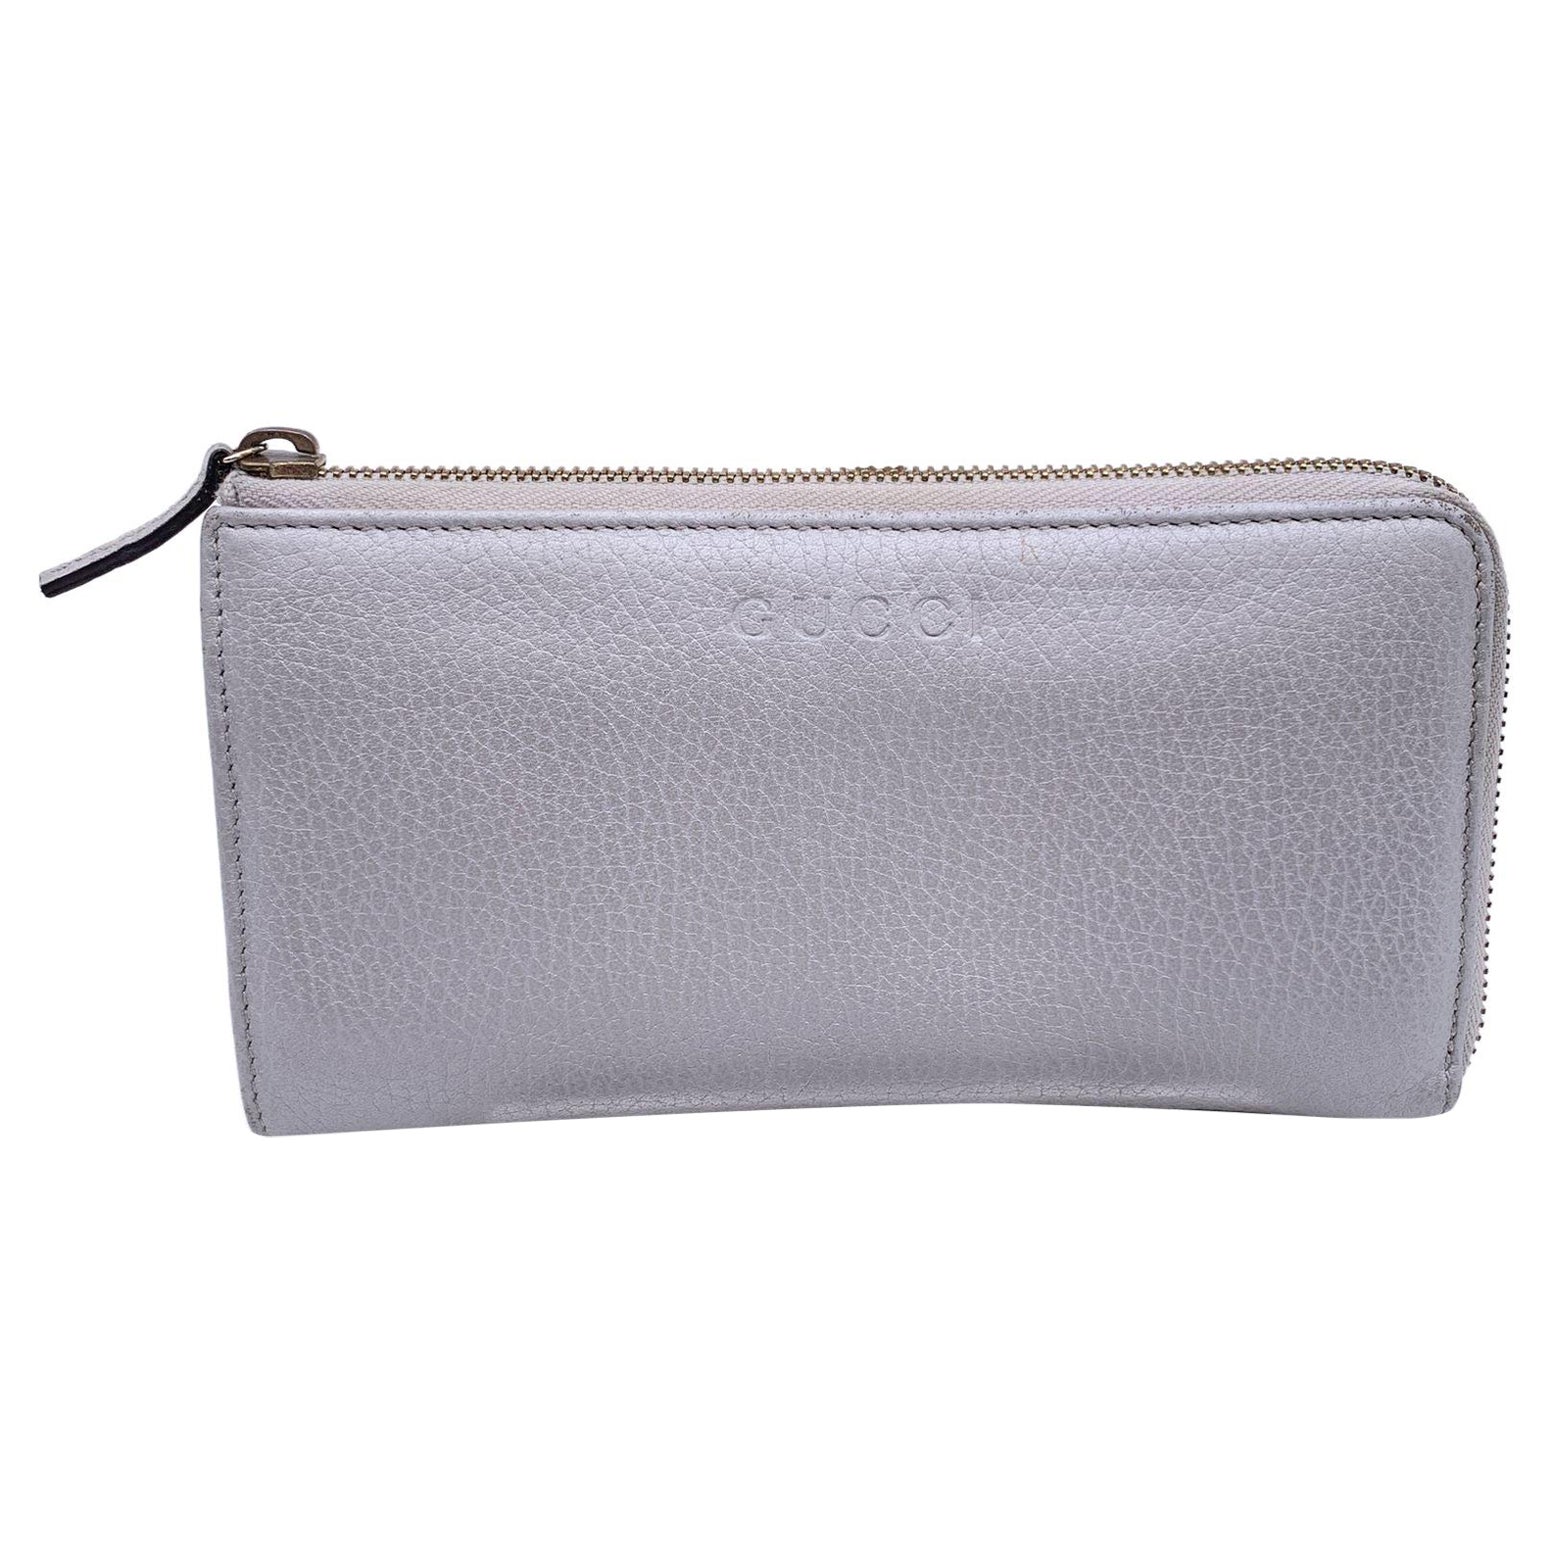 Gucci Silver Tone Leather Continental Zip Wallet Coin Purse For Sale